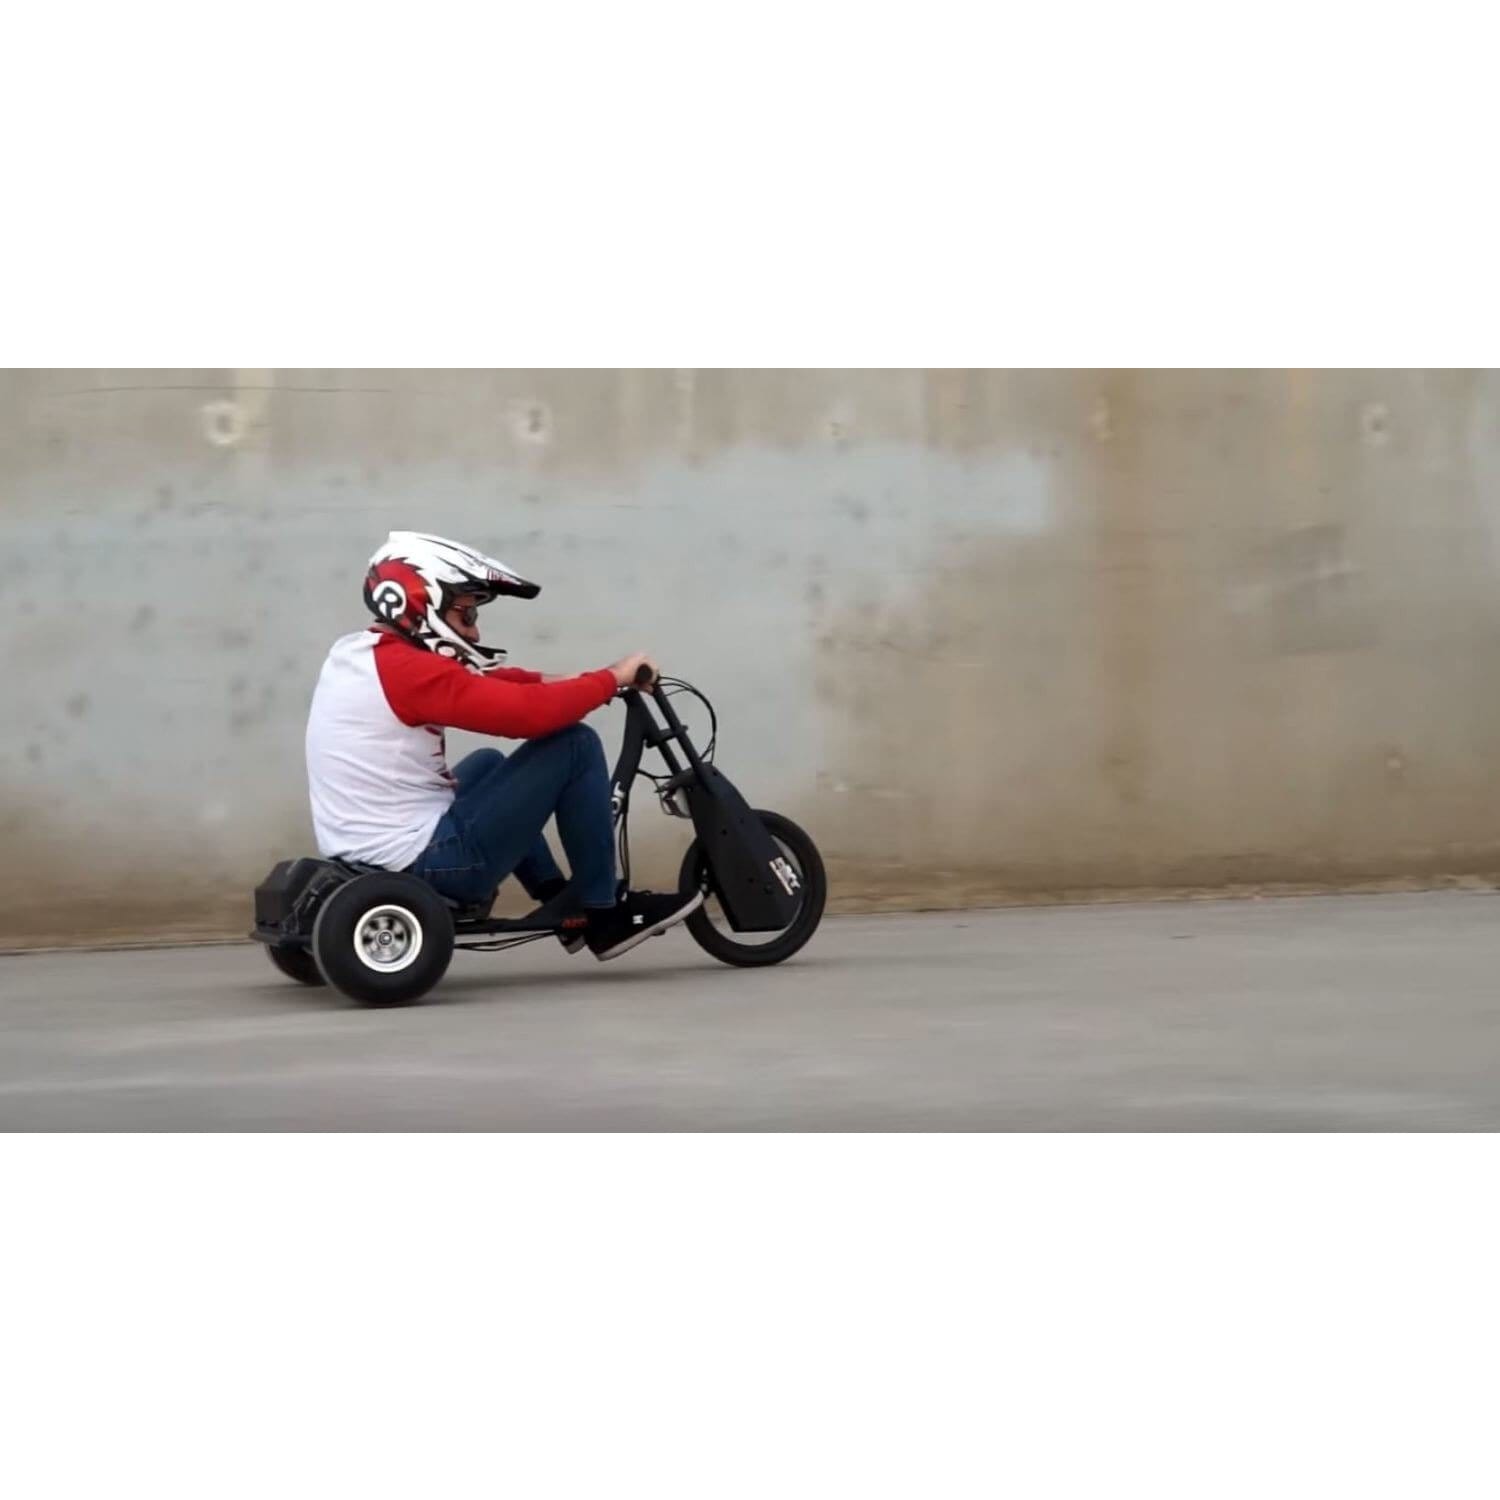 Razor DXT Electric Drift Trike 12V 500W Electric Drifting Scooter RZ-DXTEDT